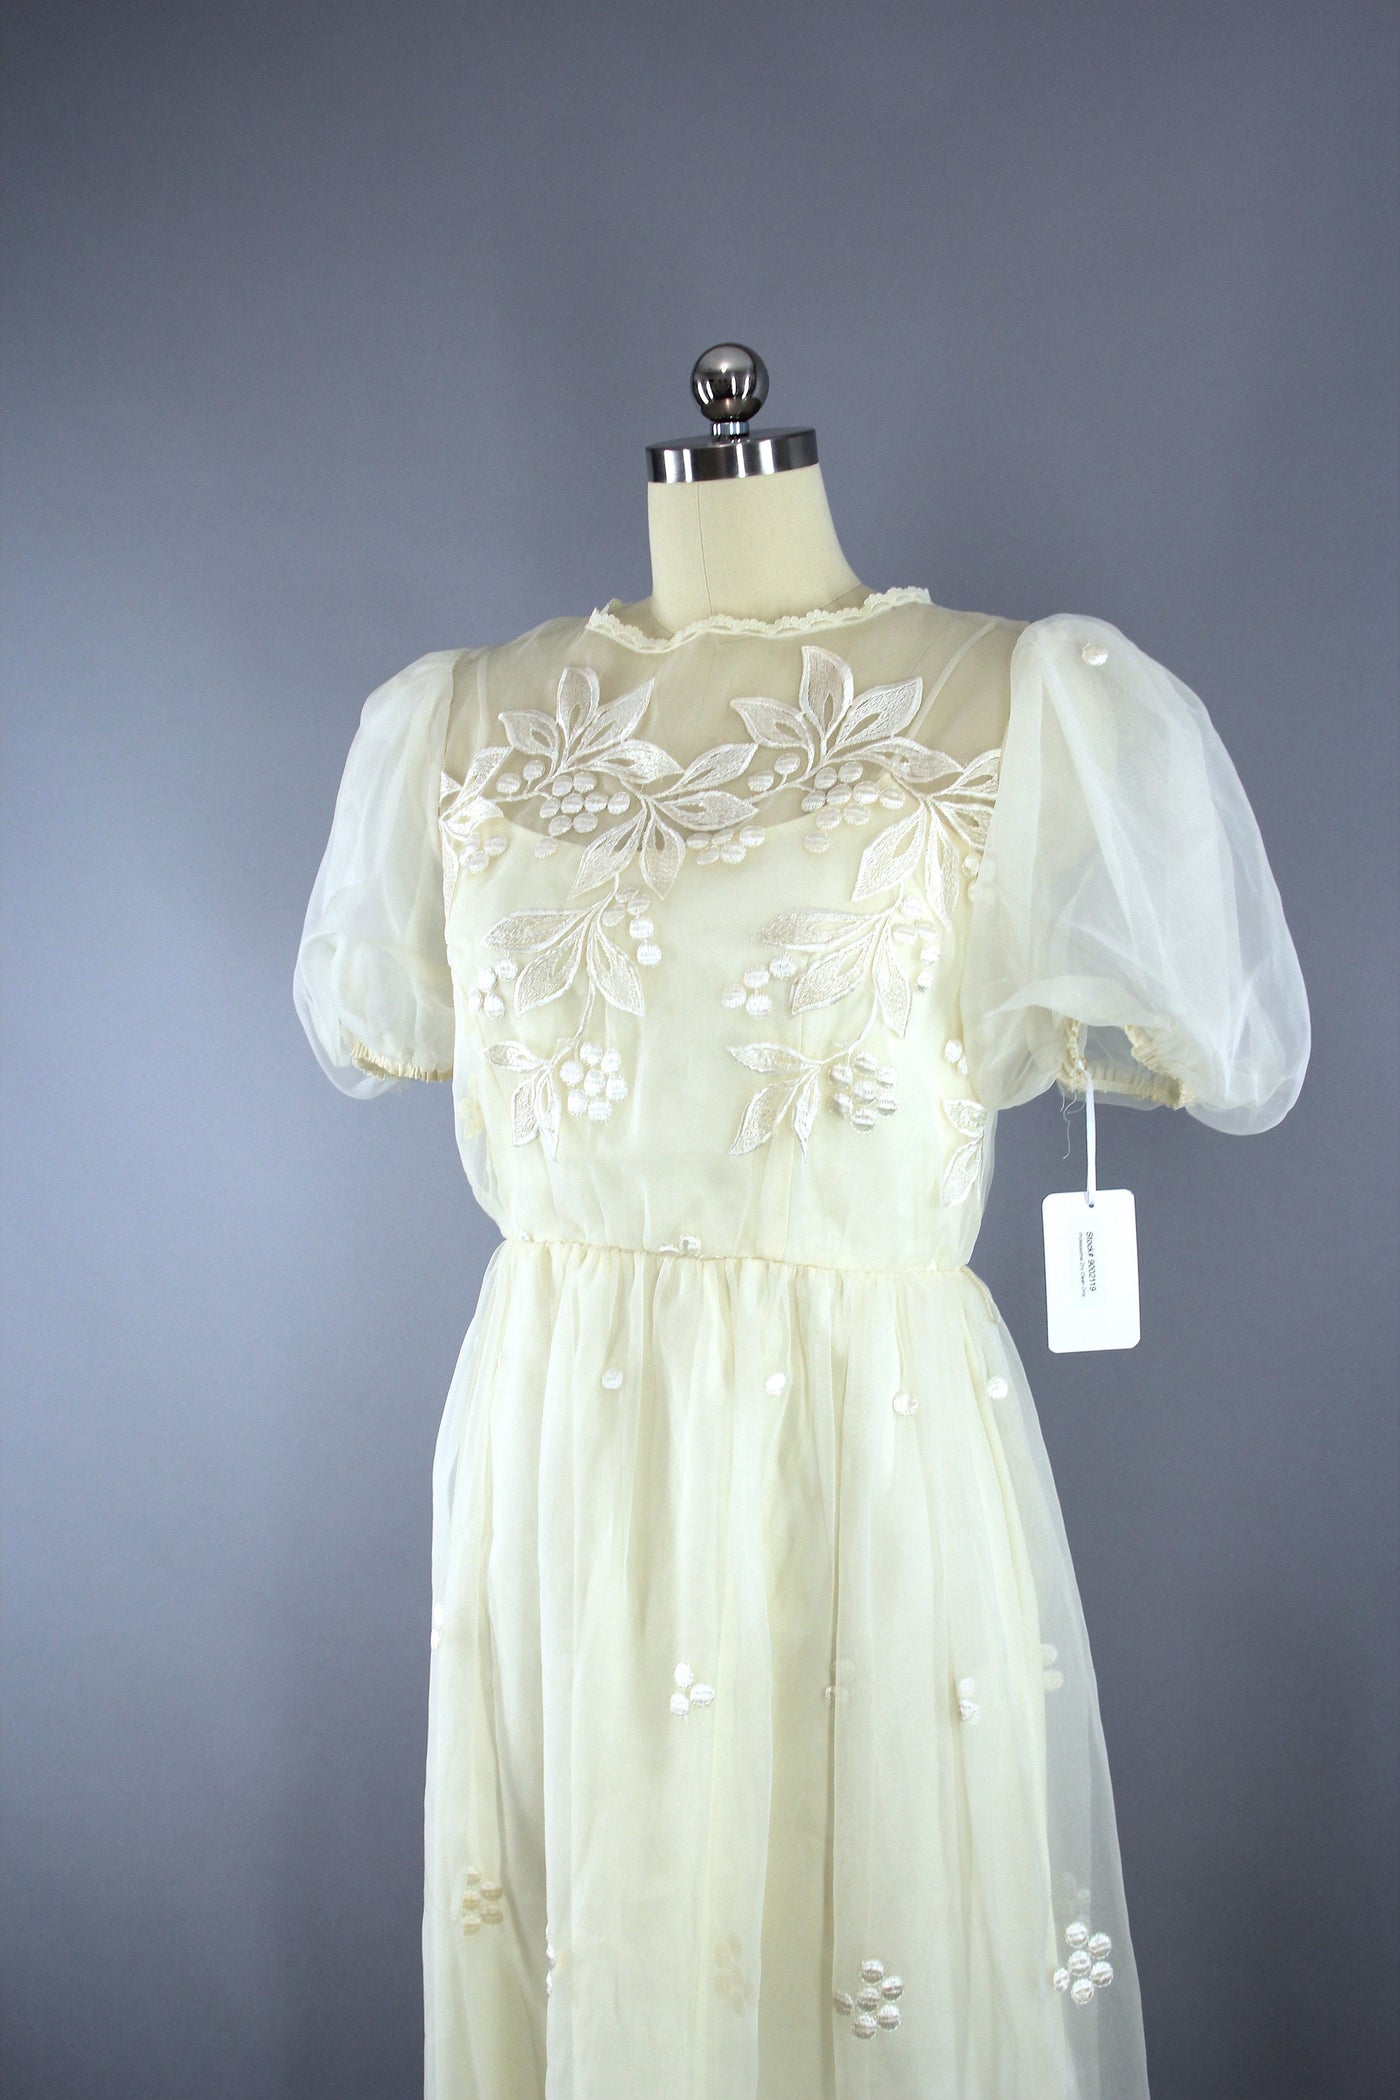 Vintage 1980s Chiffon Lace Party Dress - ThisBlueBird